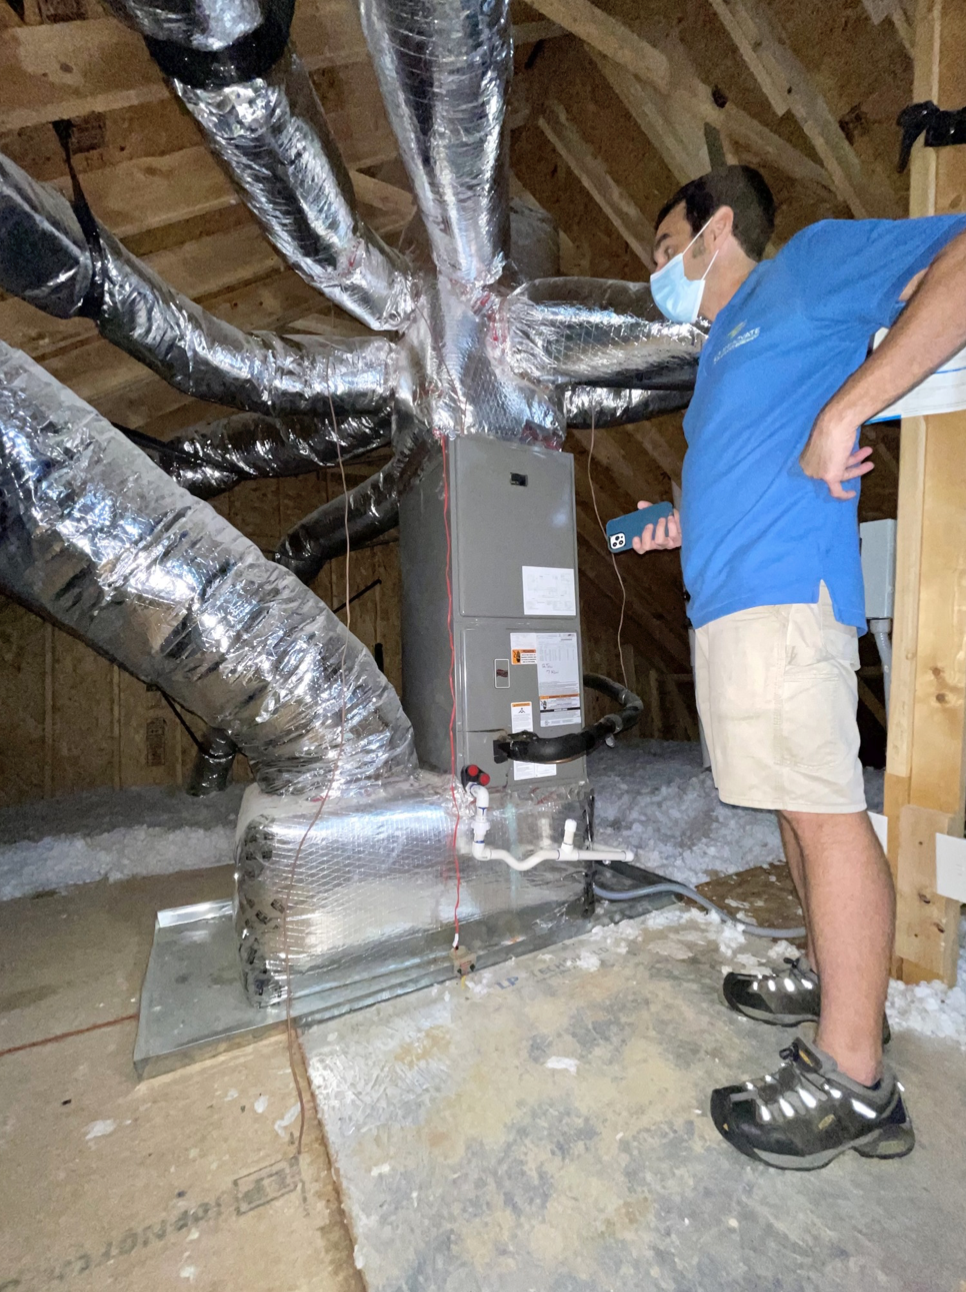 The pre-existing HVAC system had ductwork running through the unconditioned attic